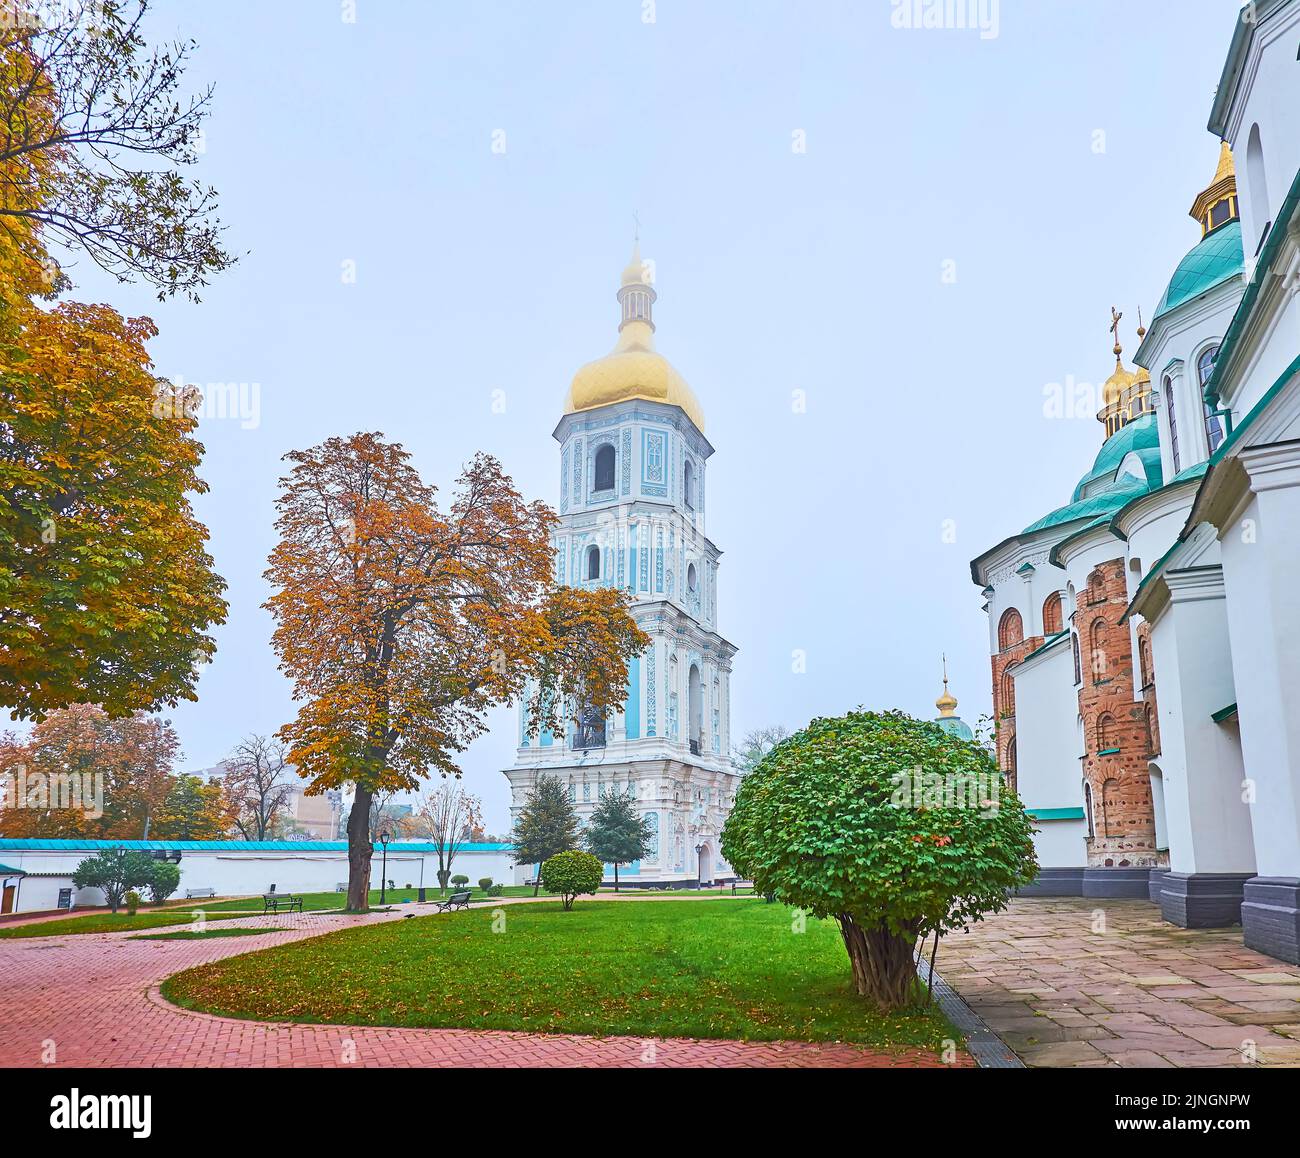 The foggy autumn weather in scenic park of St Sophia National Sanctuary with a view on medieval bell tower, topped with a golden dome, Kyiv, Ukraine Stock Photo